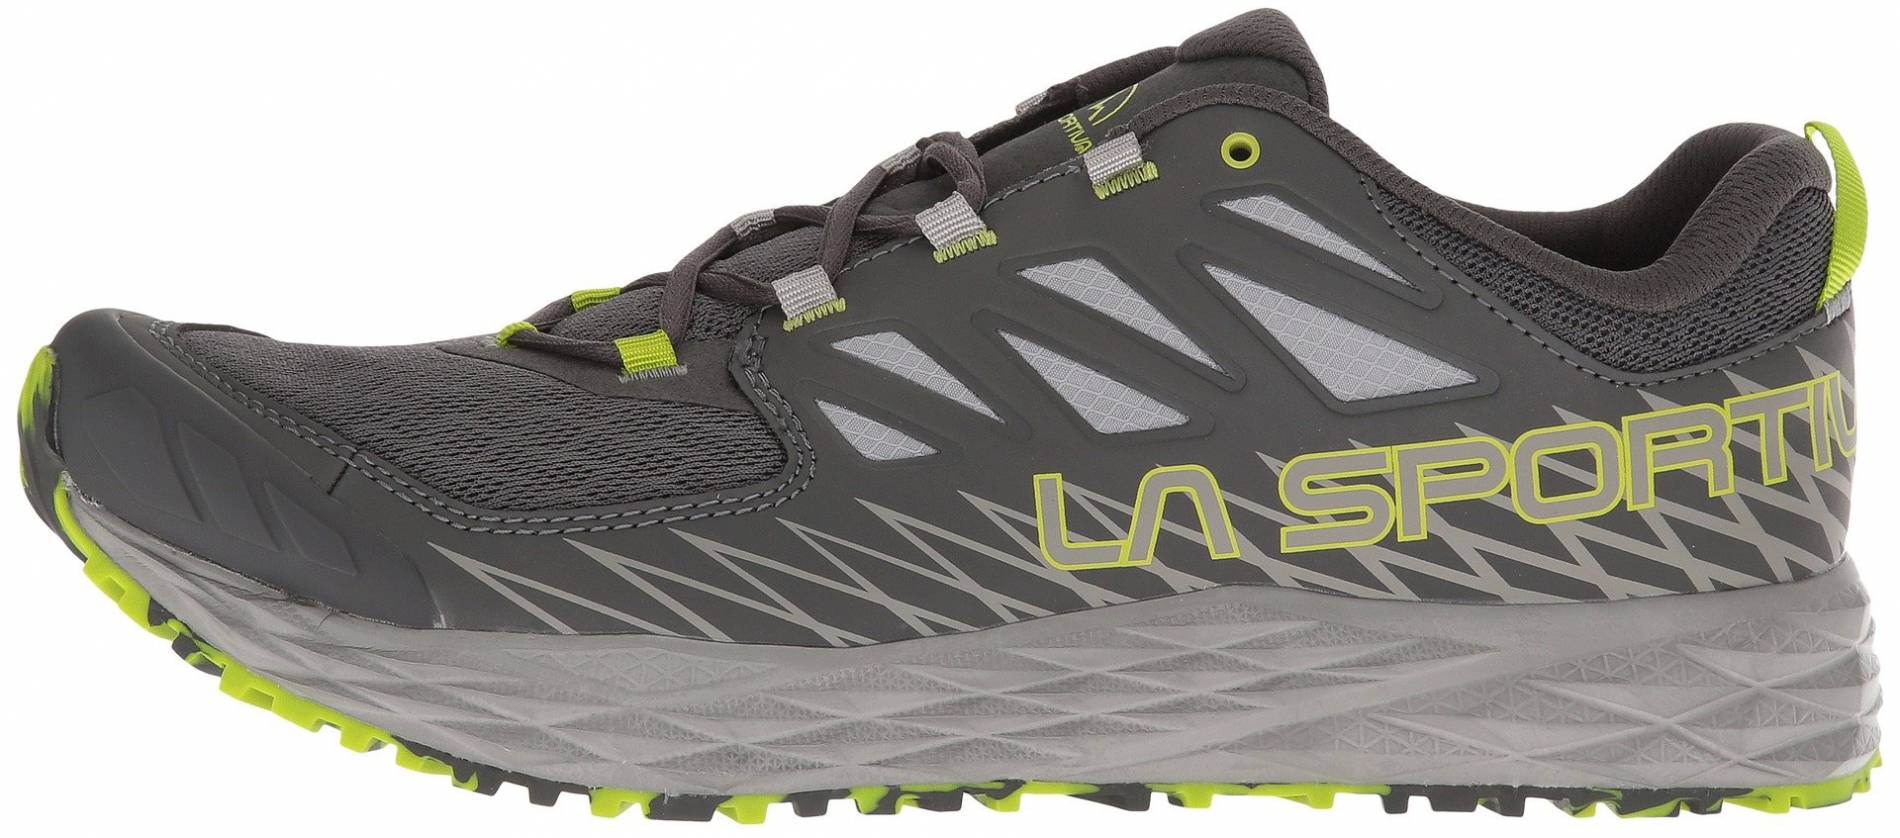 La Sportiva Men's Lycan Various Sizes and Colors 